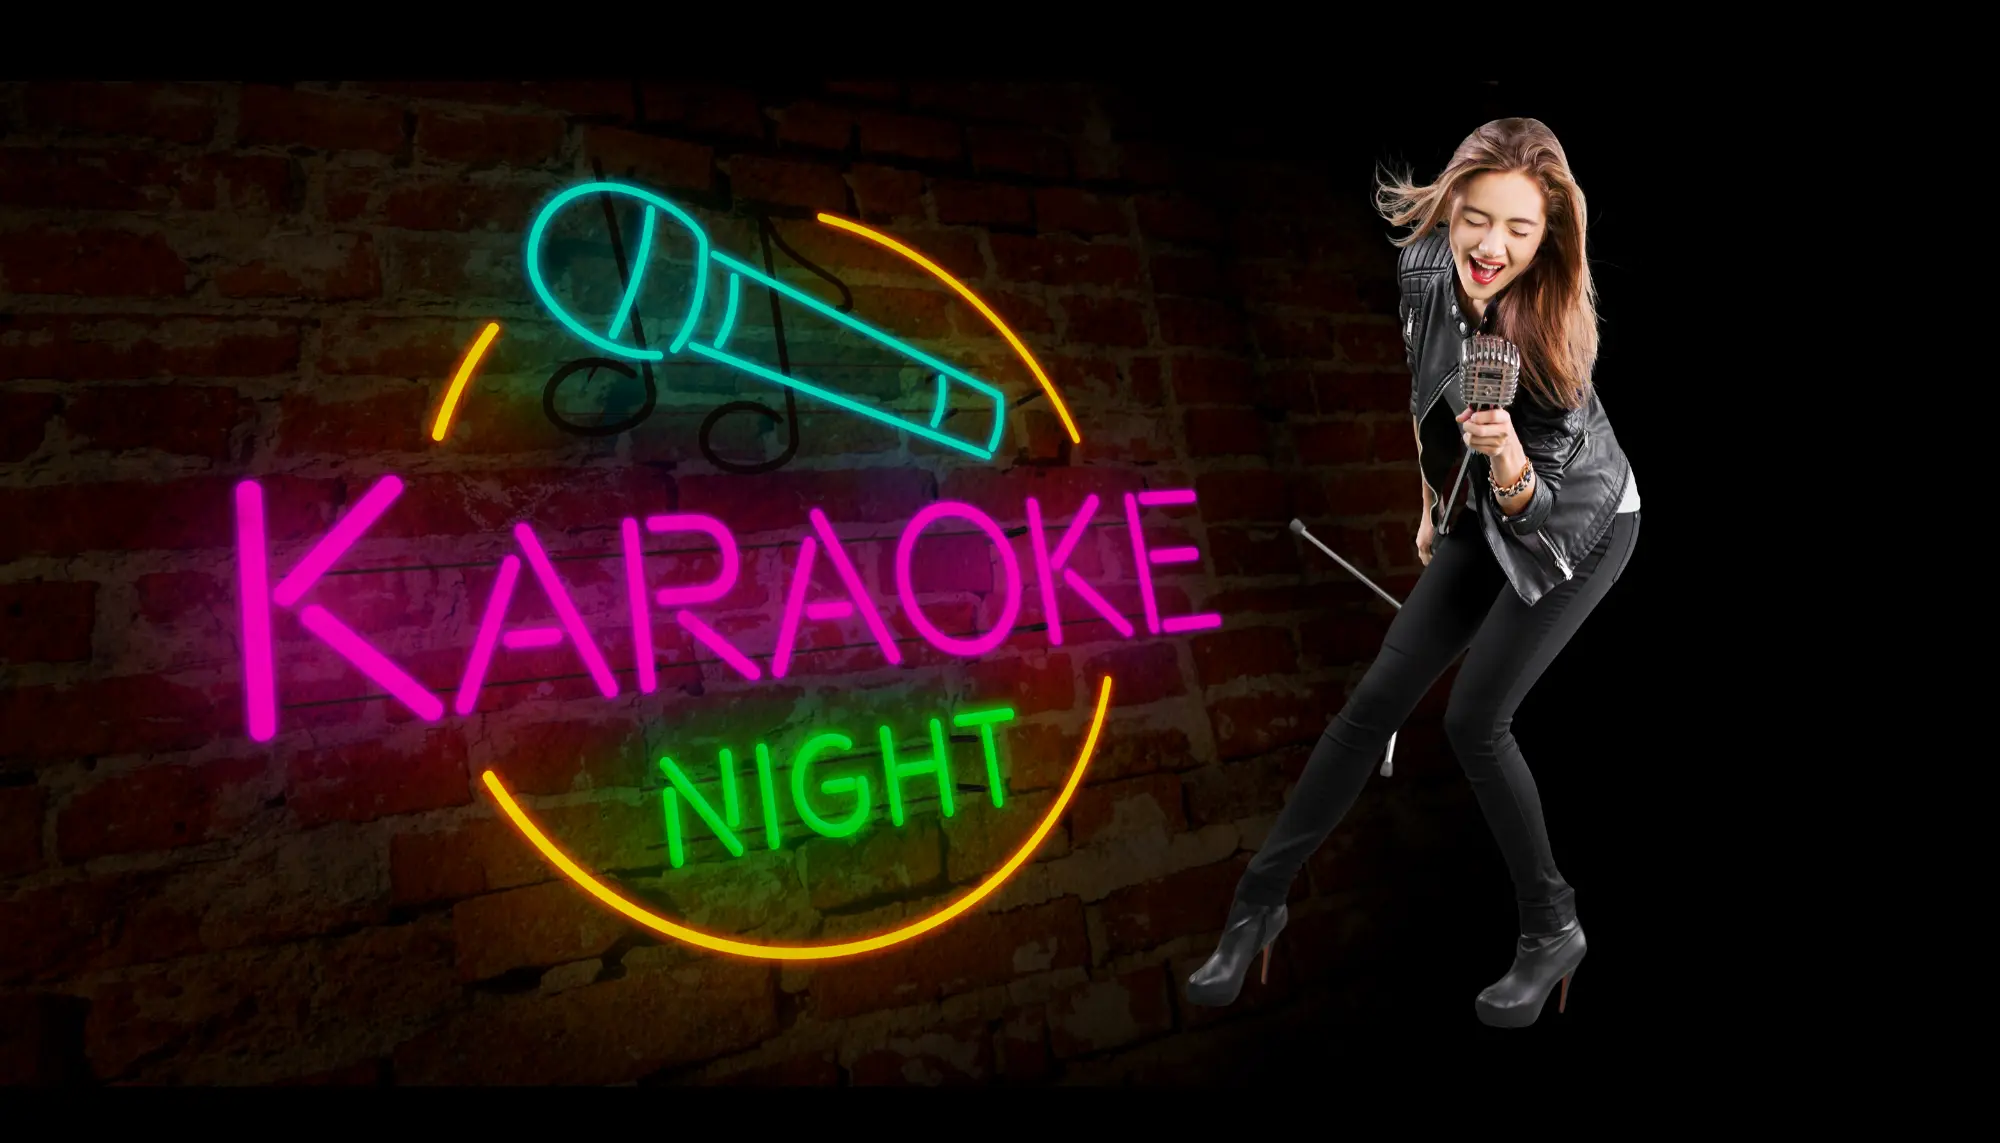 Neon karaoke sign with a woman singing into a microphone